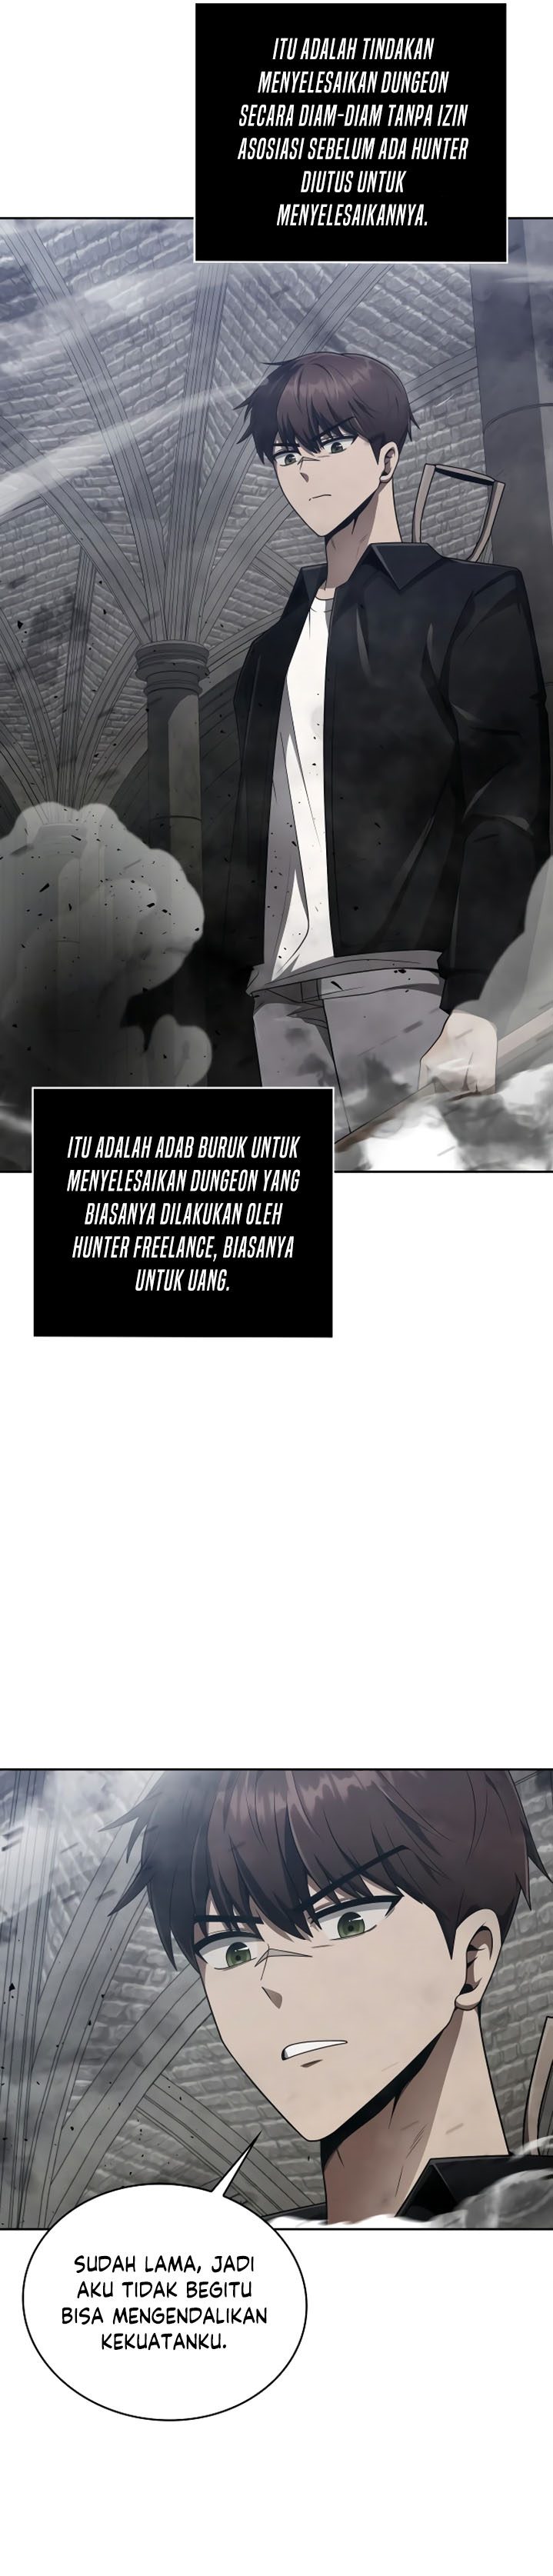 Dilarang COPAS - situs resmi www.mangacanblog.com - Komik clever cleaning life of the returned genius hunter 011 - chapter 11 12 Indonesia clever cleaning life of the returned genius hunter 011 - chapter 11 Terbaru 5|Baca Manga Komik Indonesia|Mangacan